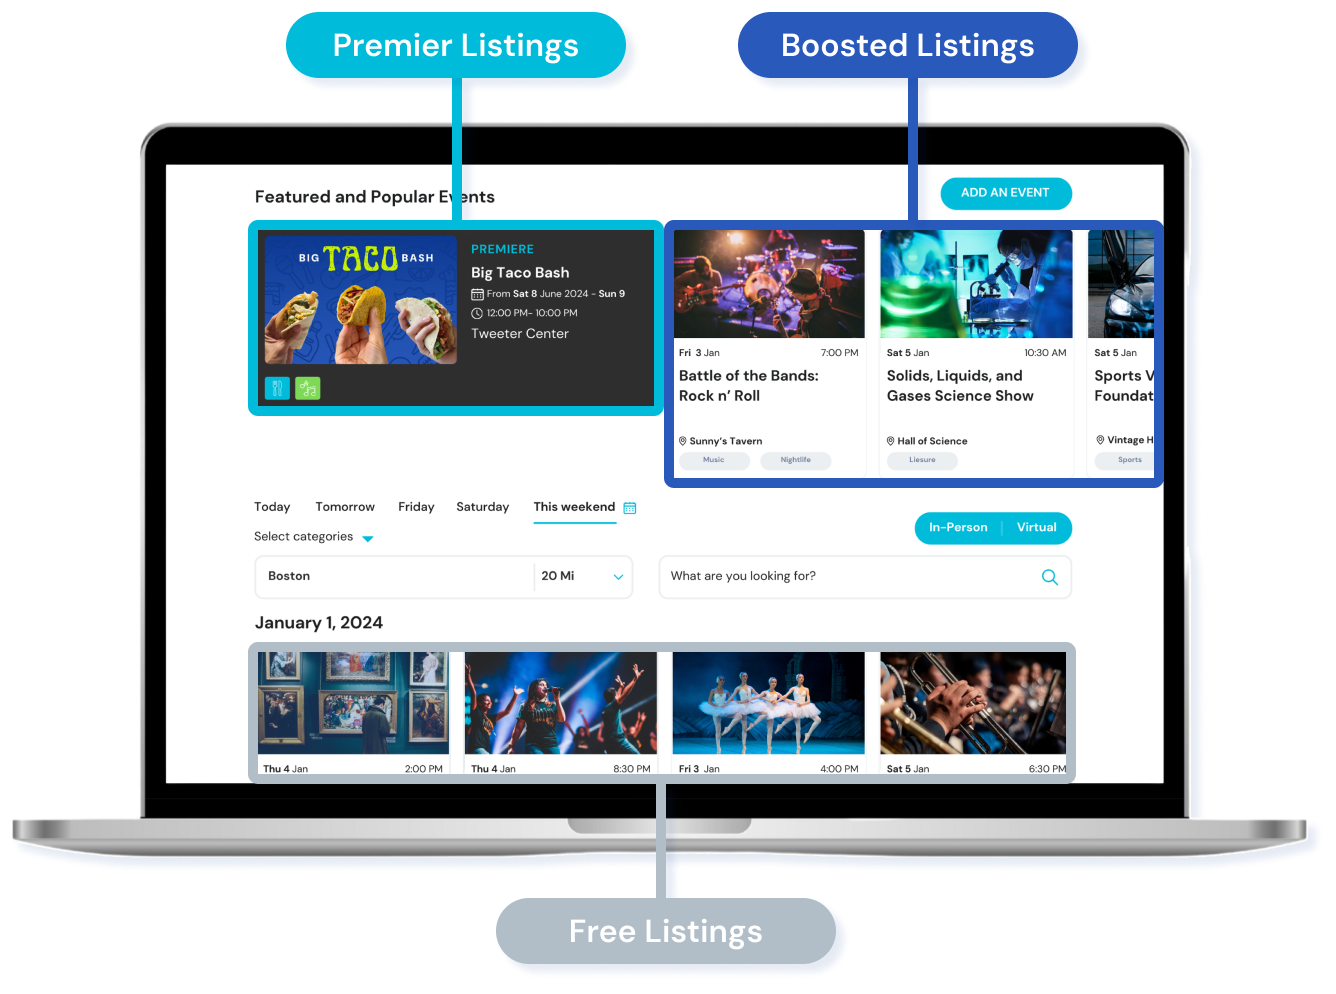 Events.com Calendar Network with Premier Listings, Boosted Listings and Free Listings